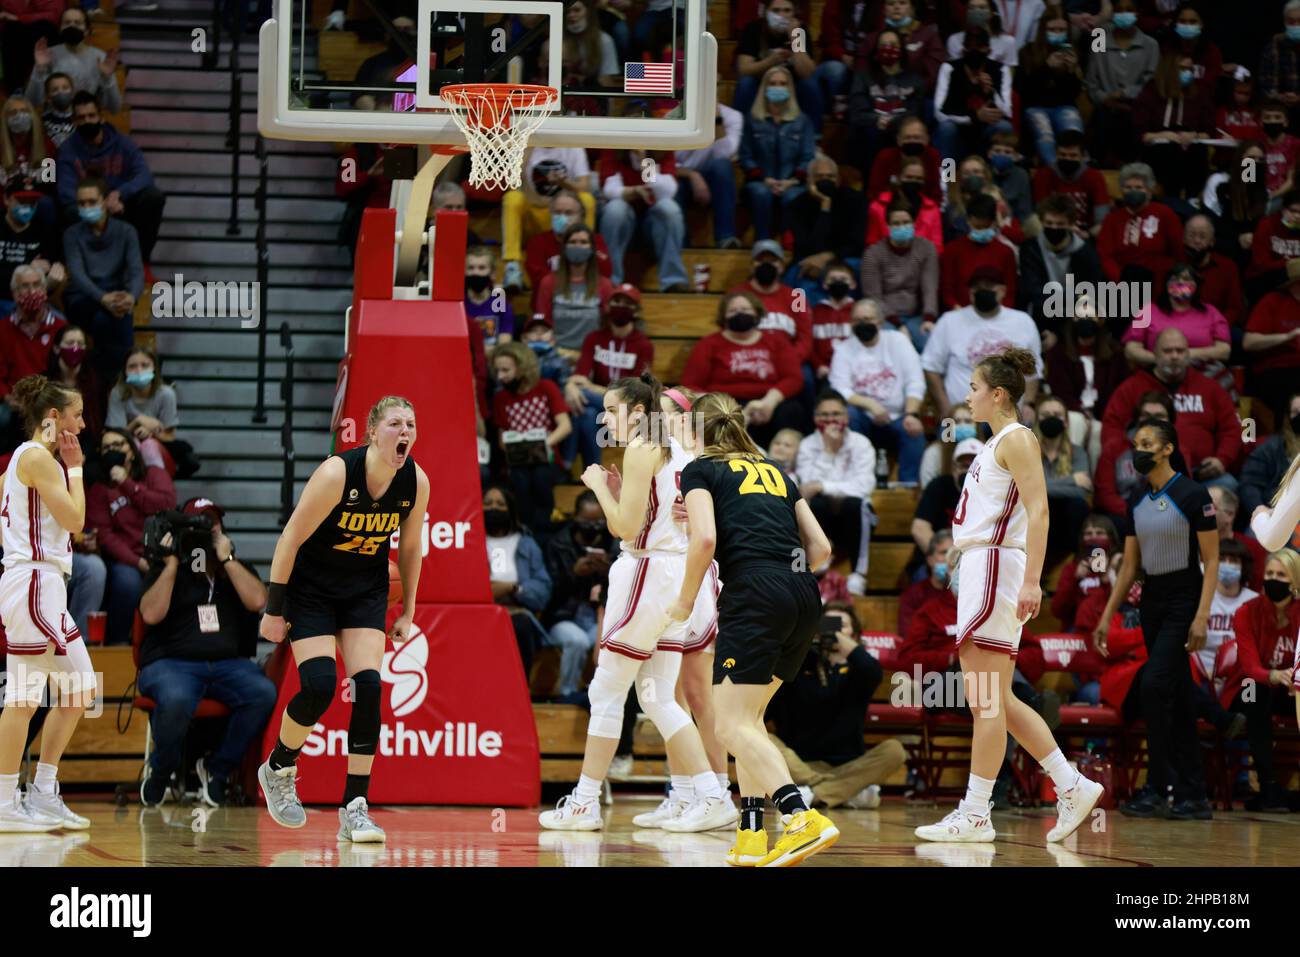 Bloomington, United States. 19th Feb, 2022. Iowa Hawkeyes forward Monika Czinano (25) reacts while playing against Indiana University during an NCAA women's basketball game in Bloomington, Ind. The Iowa Hawkeyes beat the Indiana University Hoosiers 96-91. Credit: SOPA Images Limited/Alamy Live News Stock Photo